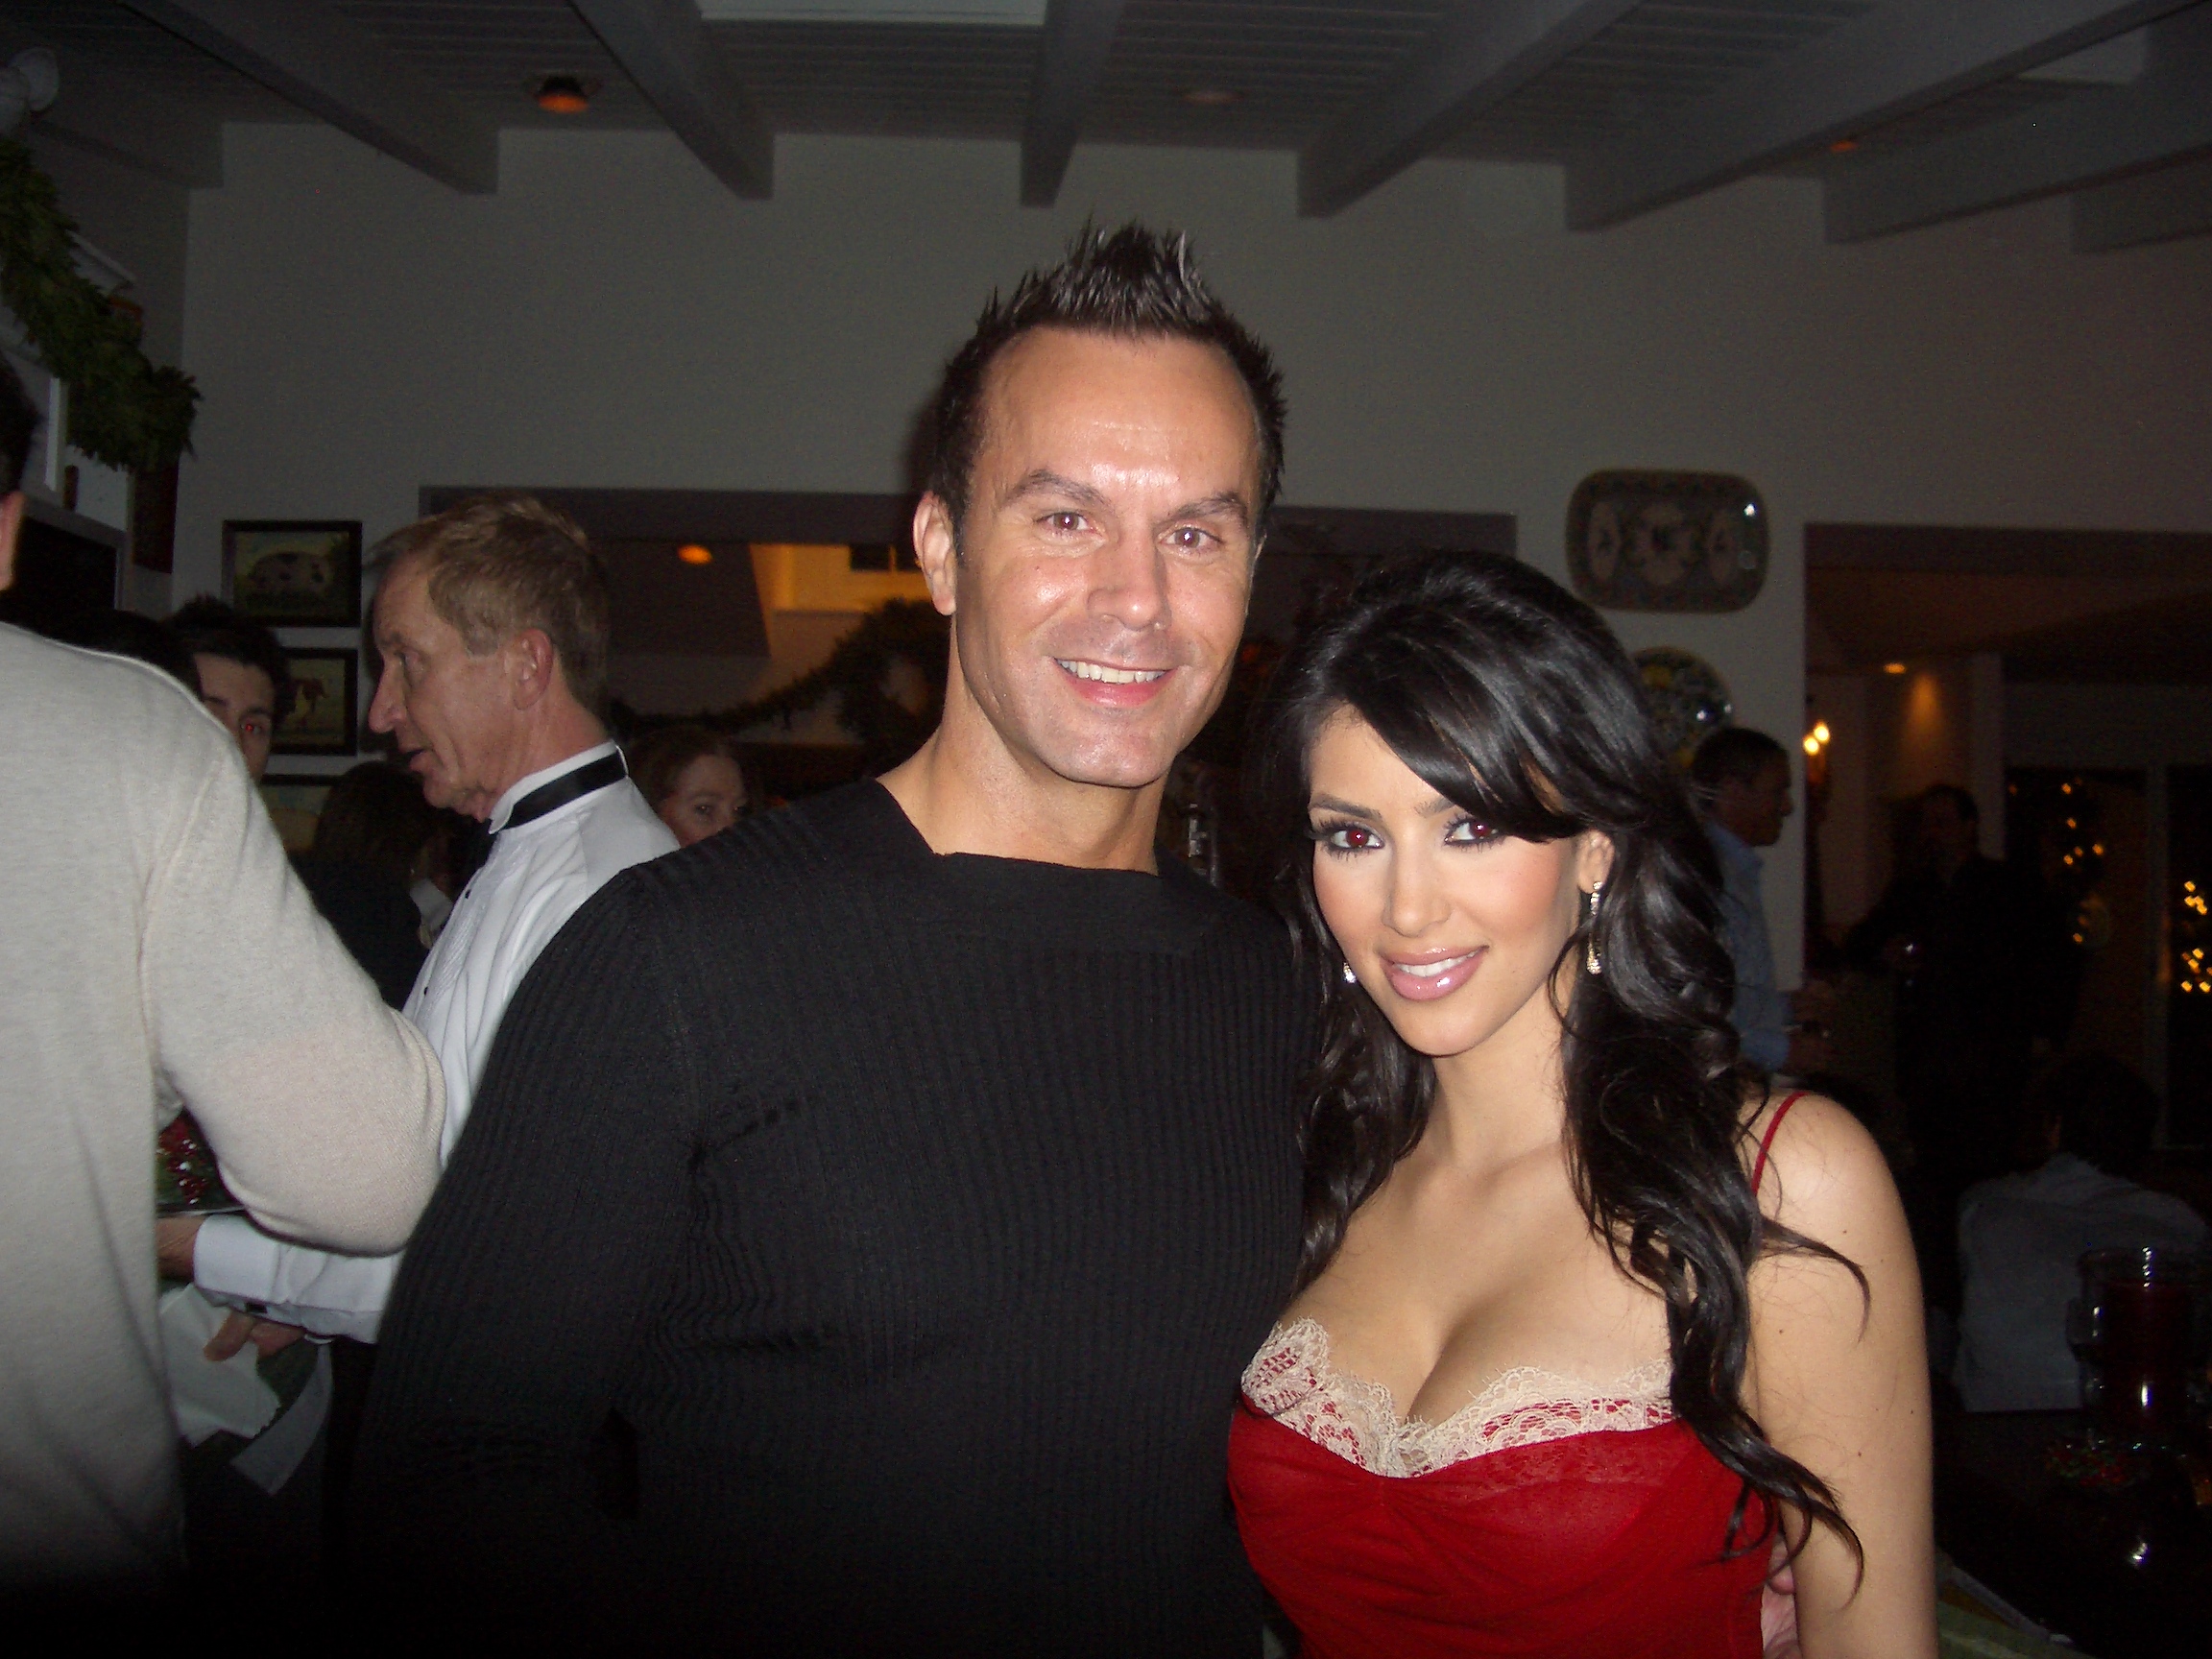 Mark Lund and Kim Kardashian at Kris and Bruce Jenner's Christmas Eve party. 2007.